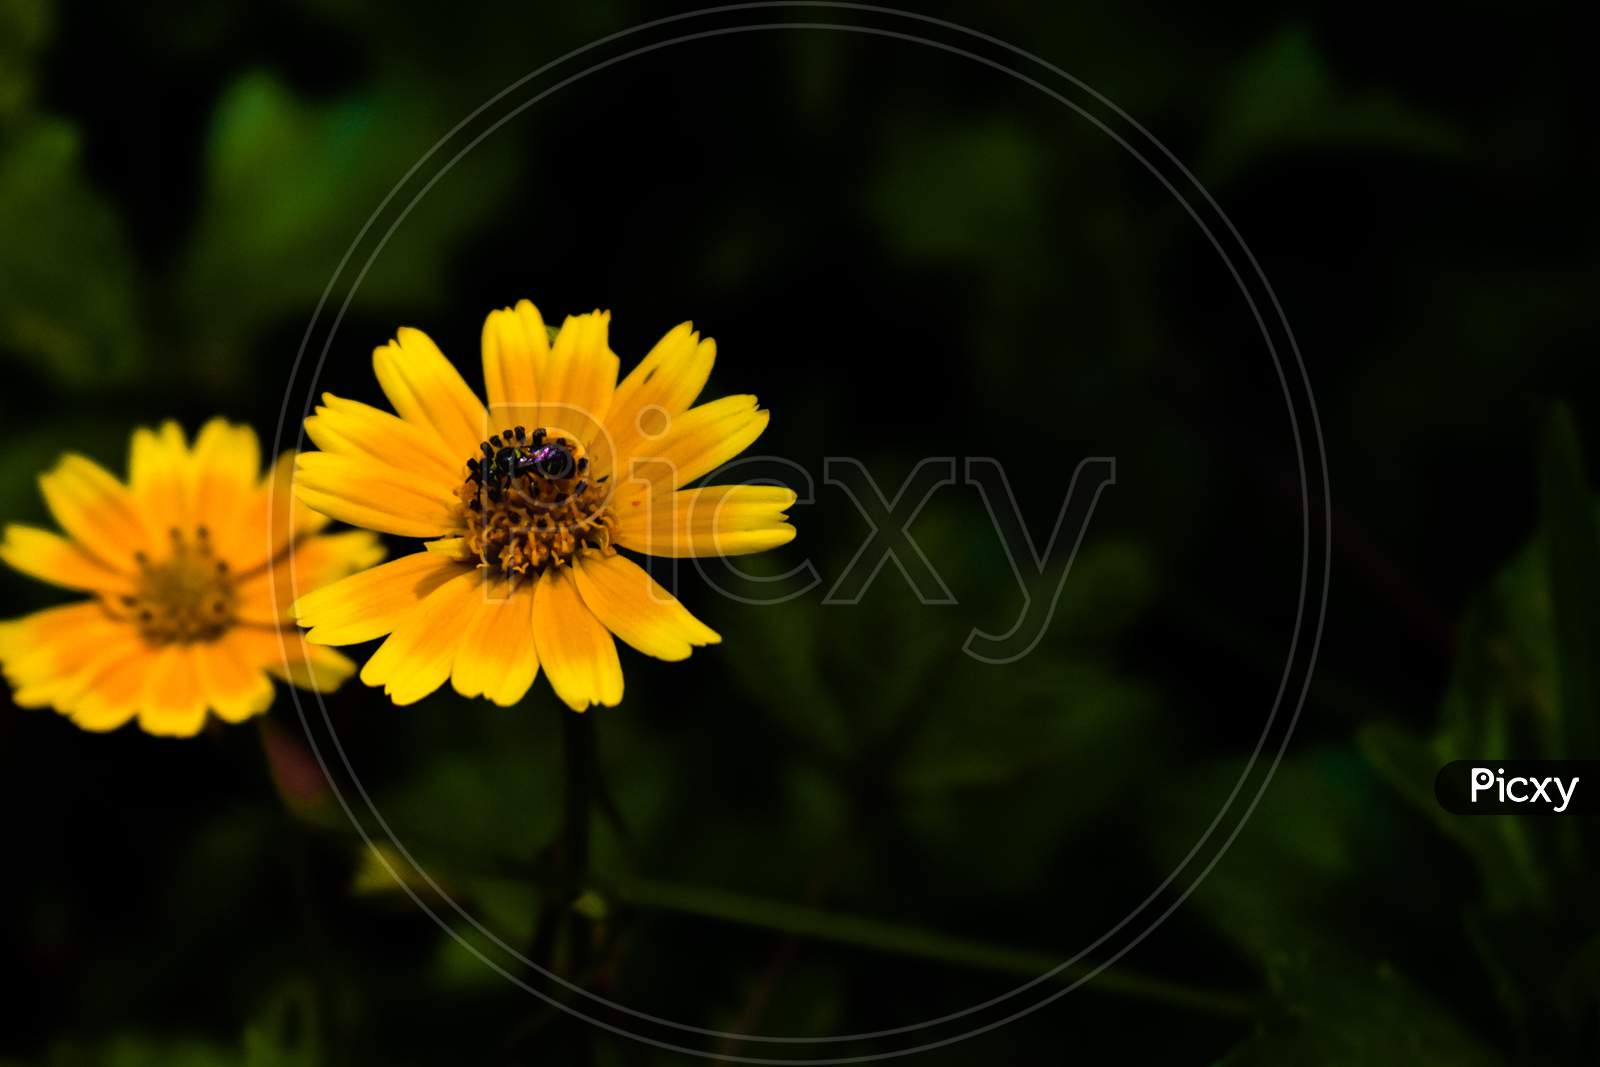 Singapore Daisy Flower In Focus With Green Leaves All Around It. Yellow Flowers